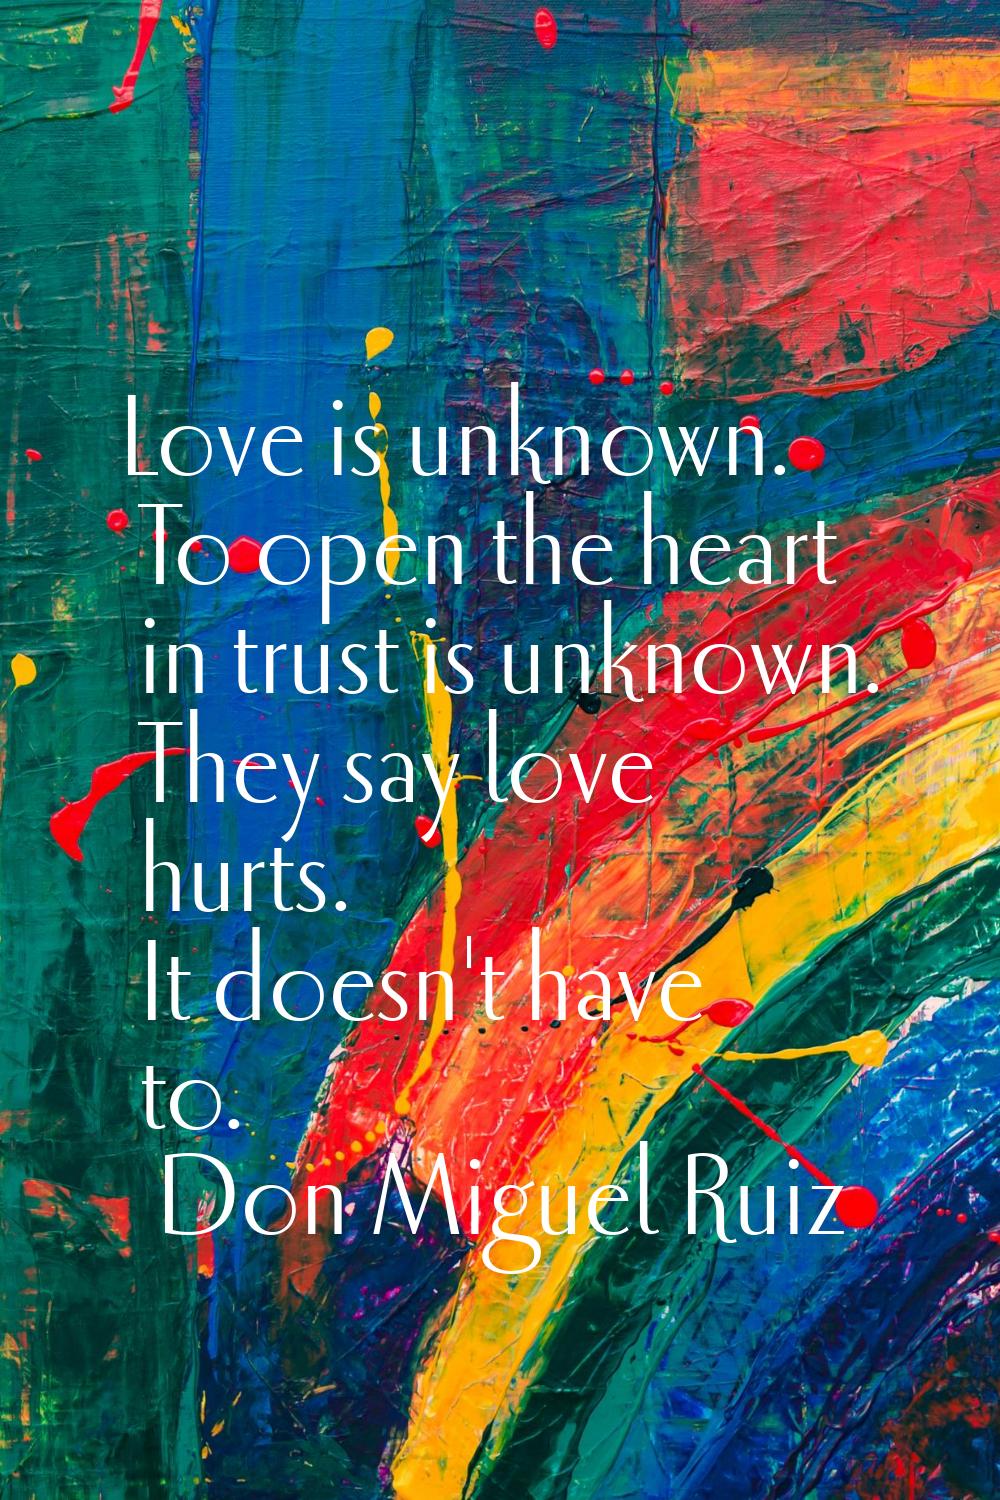 Love is unknown. To open the heart in trust is unknown. They say love hurts. It doesn't have to.